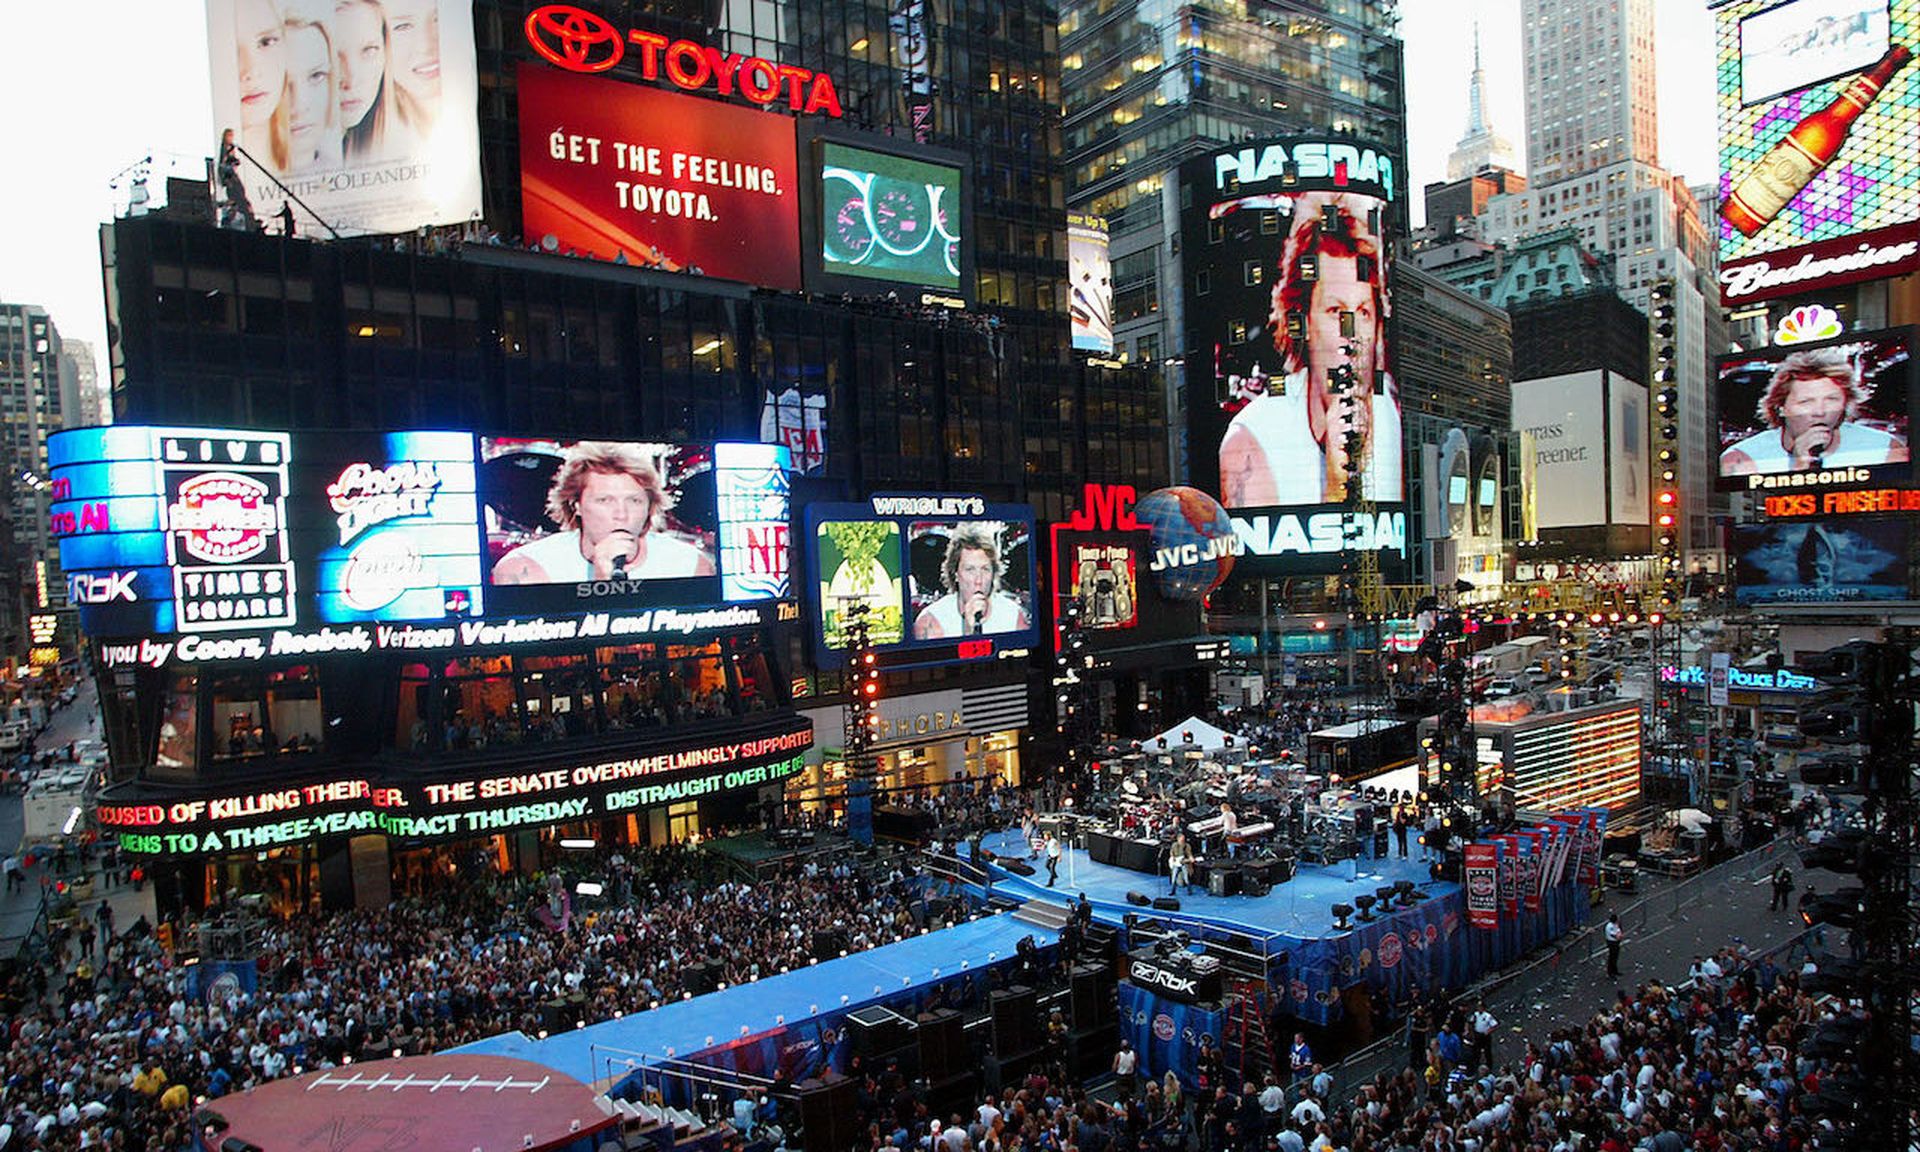 View of Jumbotrons in Times Square. (Photo by Scott Gries/Getty Images)